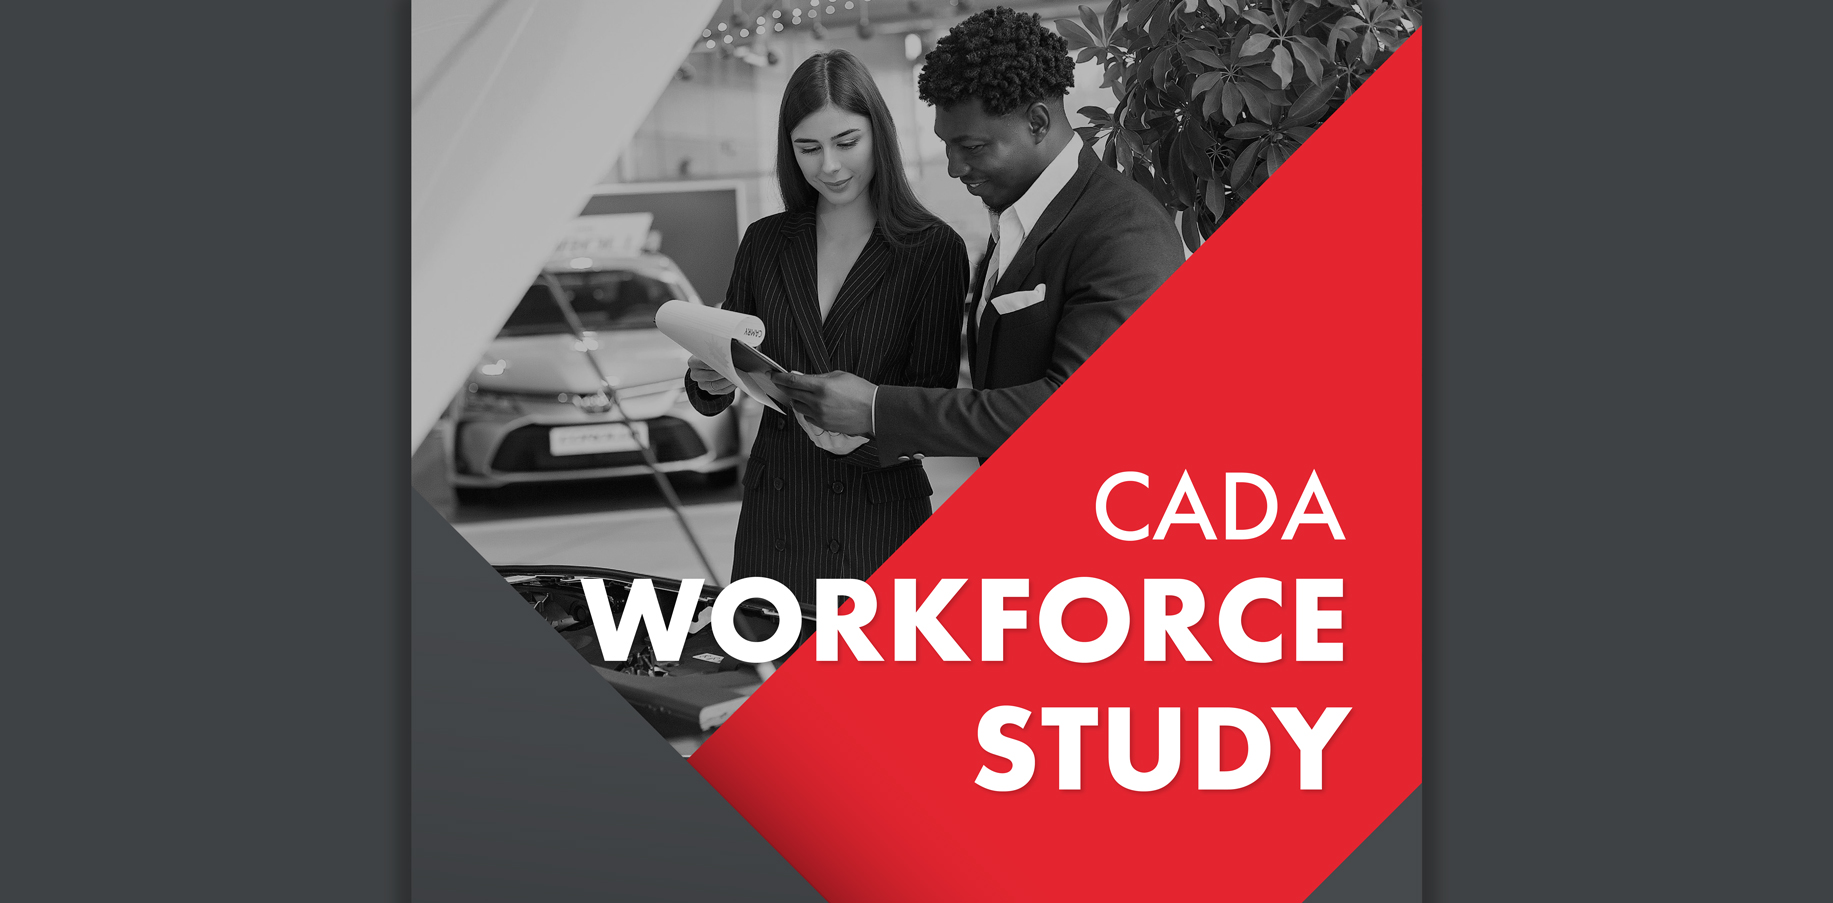 New CADA Workforce Study data helps dealers navigate industry conditions